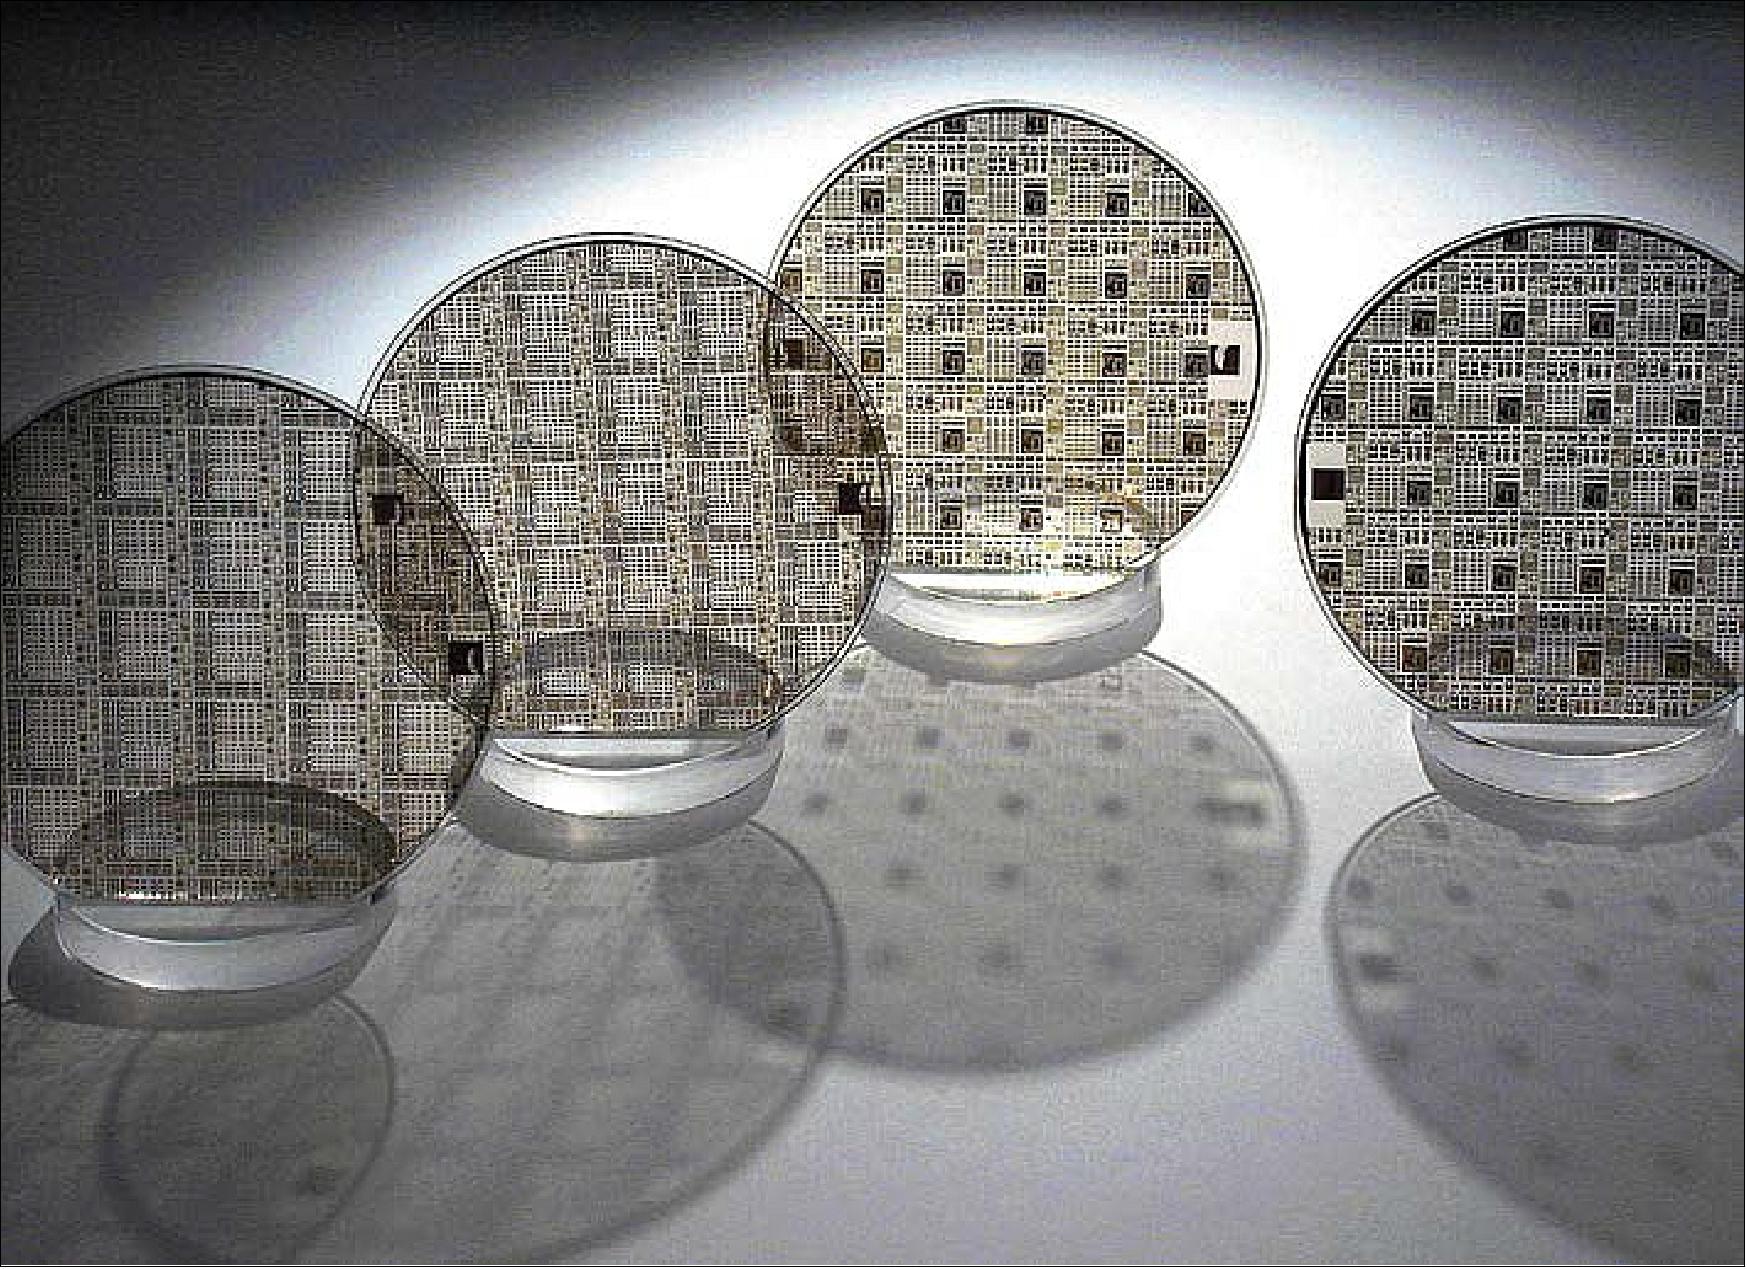 Figure 85: Gallium nitride (GaN) circuits on silicon carbide wafers: GaN as a key enabling technology for space (image credit: ESA)